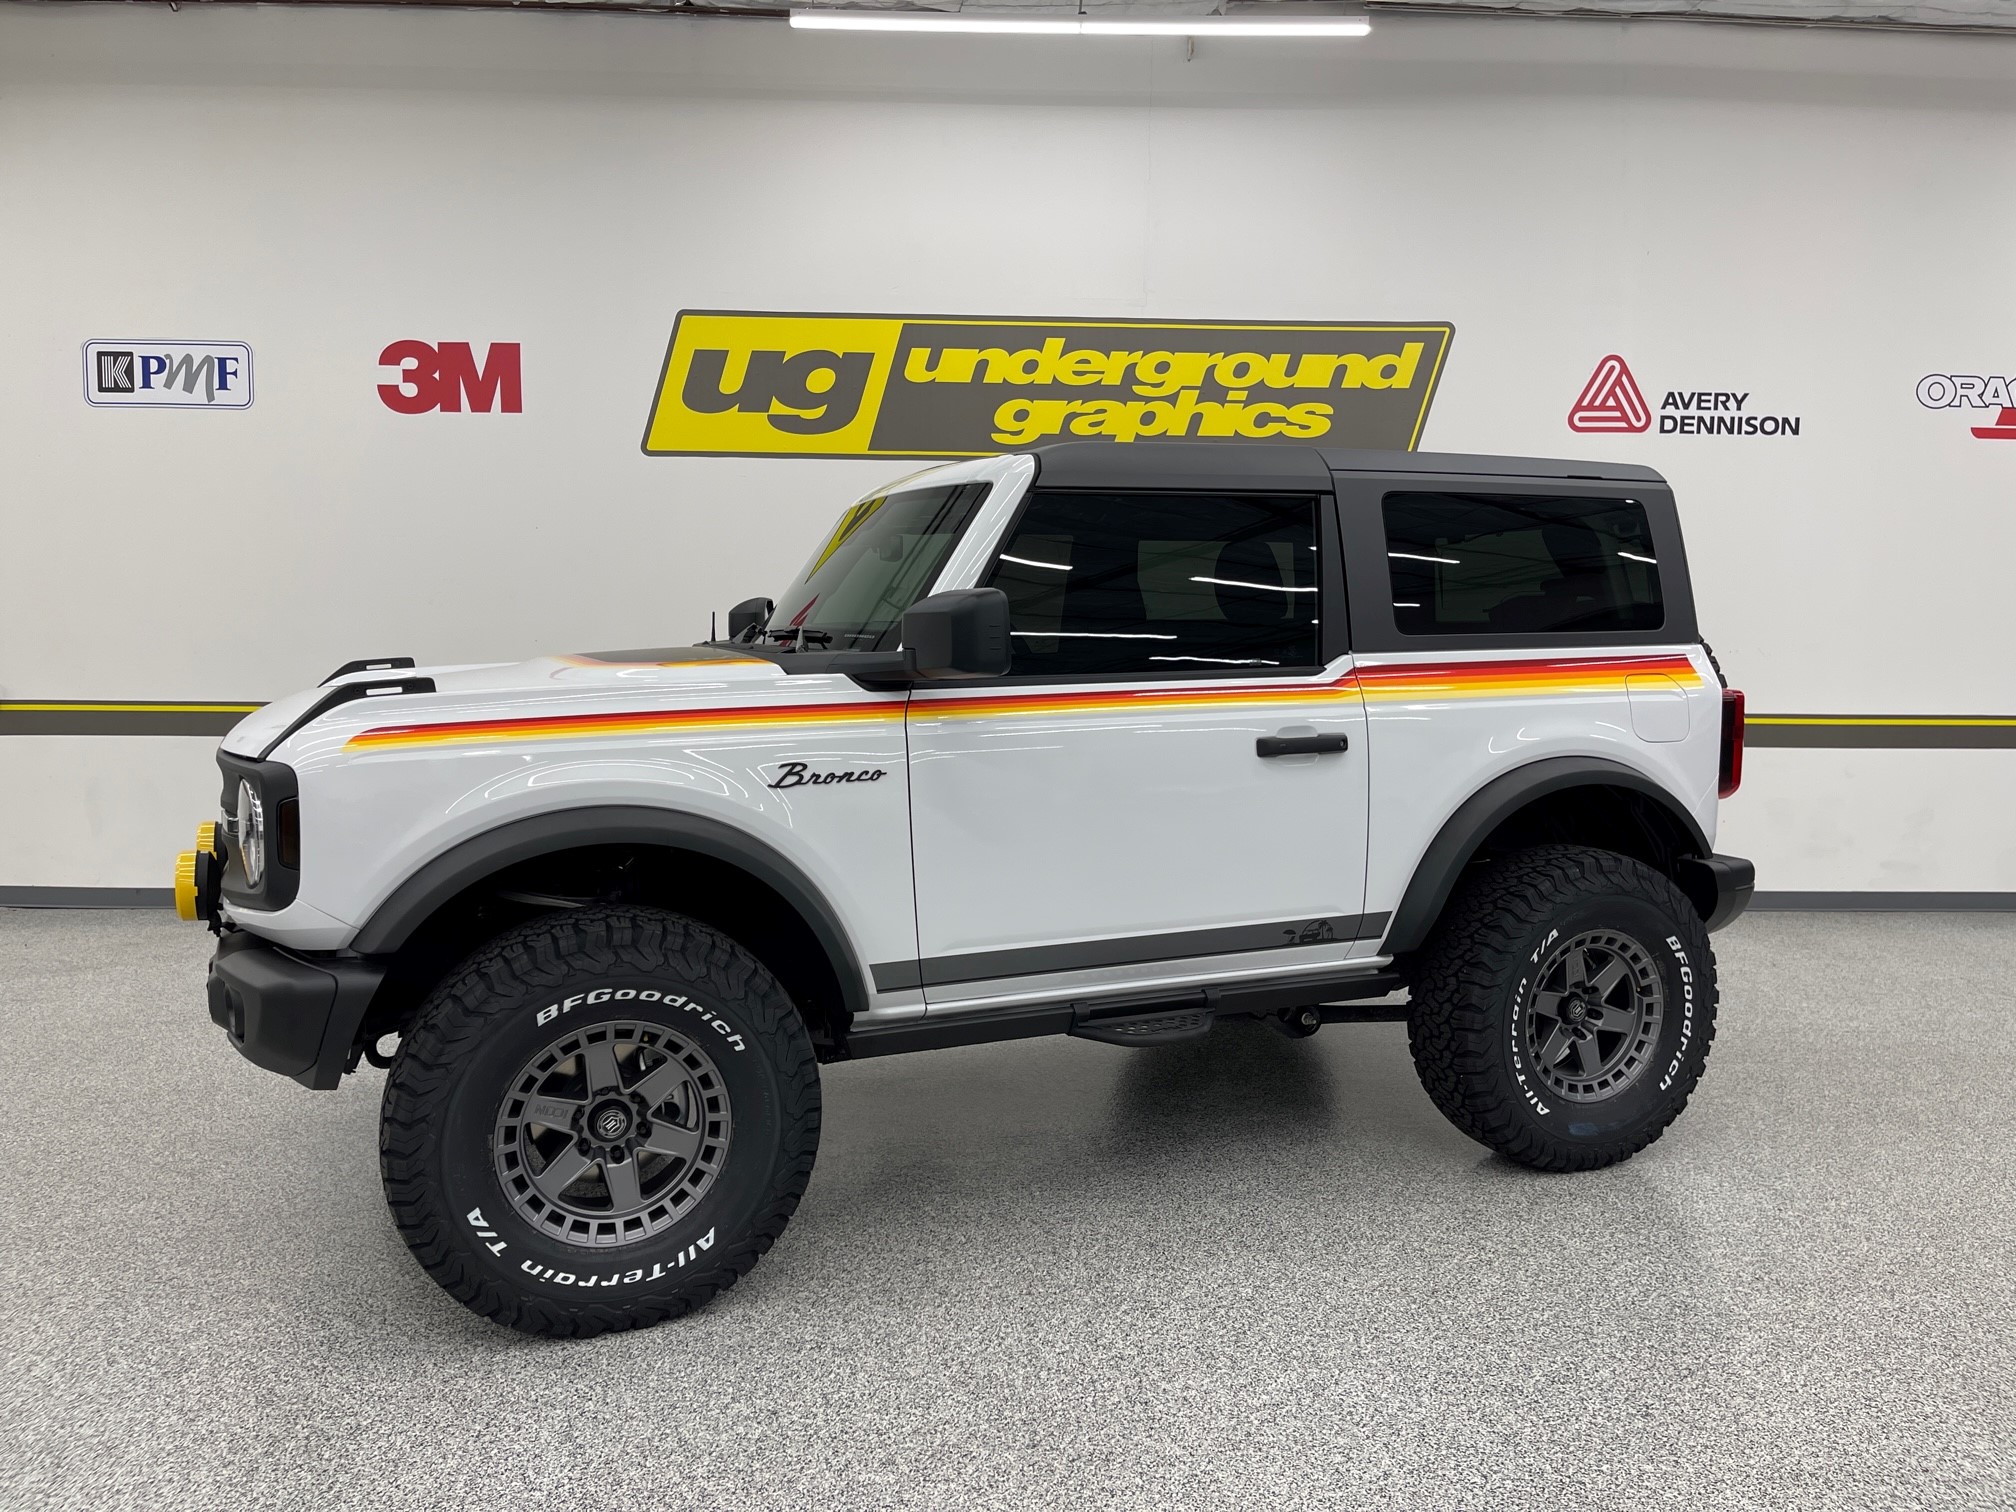 Ford Bronco Bronco Outfitter's retro themed White BD 2-door! 1966 light opal poly